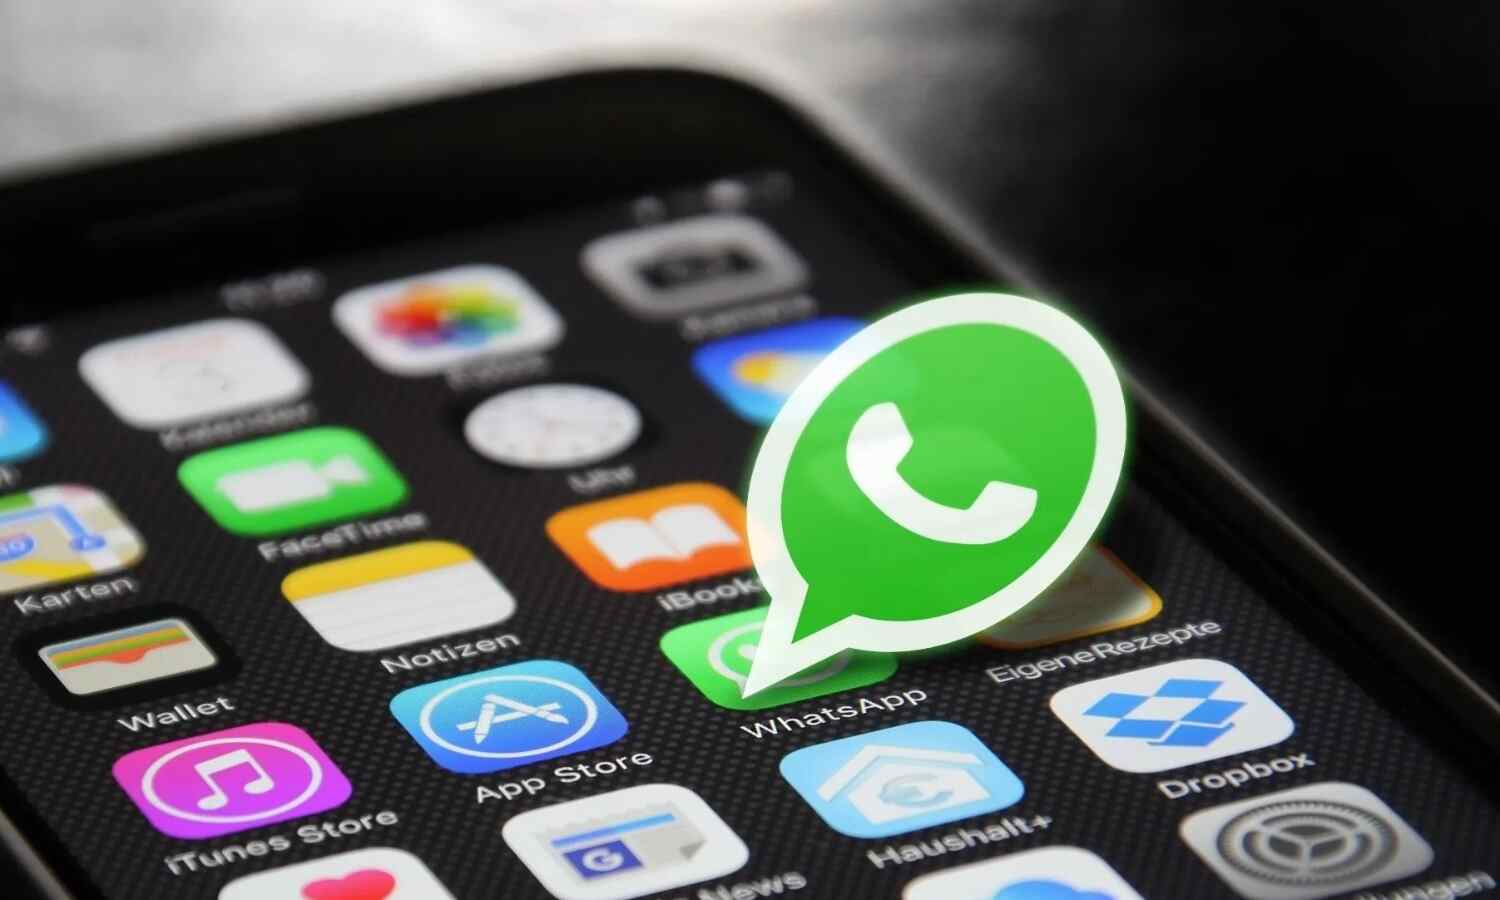 WhatsApp releases update to fix expiration bug on Android beta